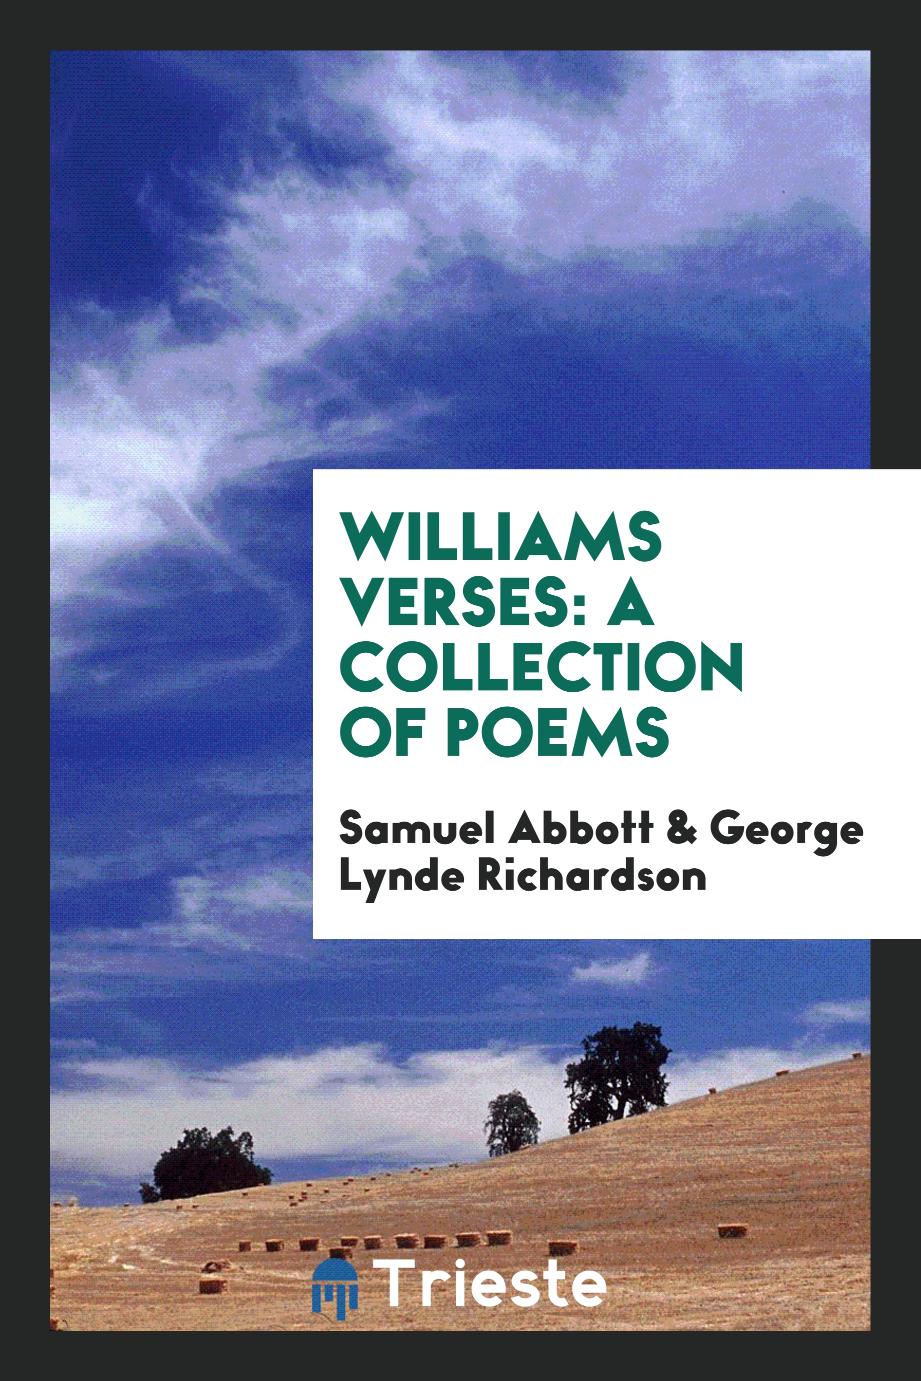 Williams Verses: A Collection of Poems